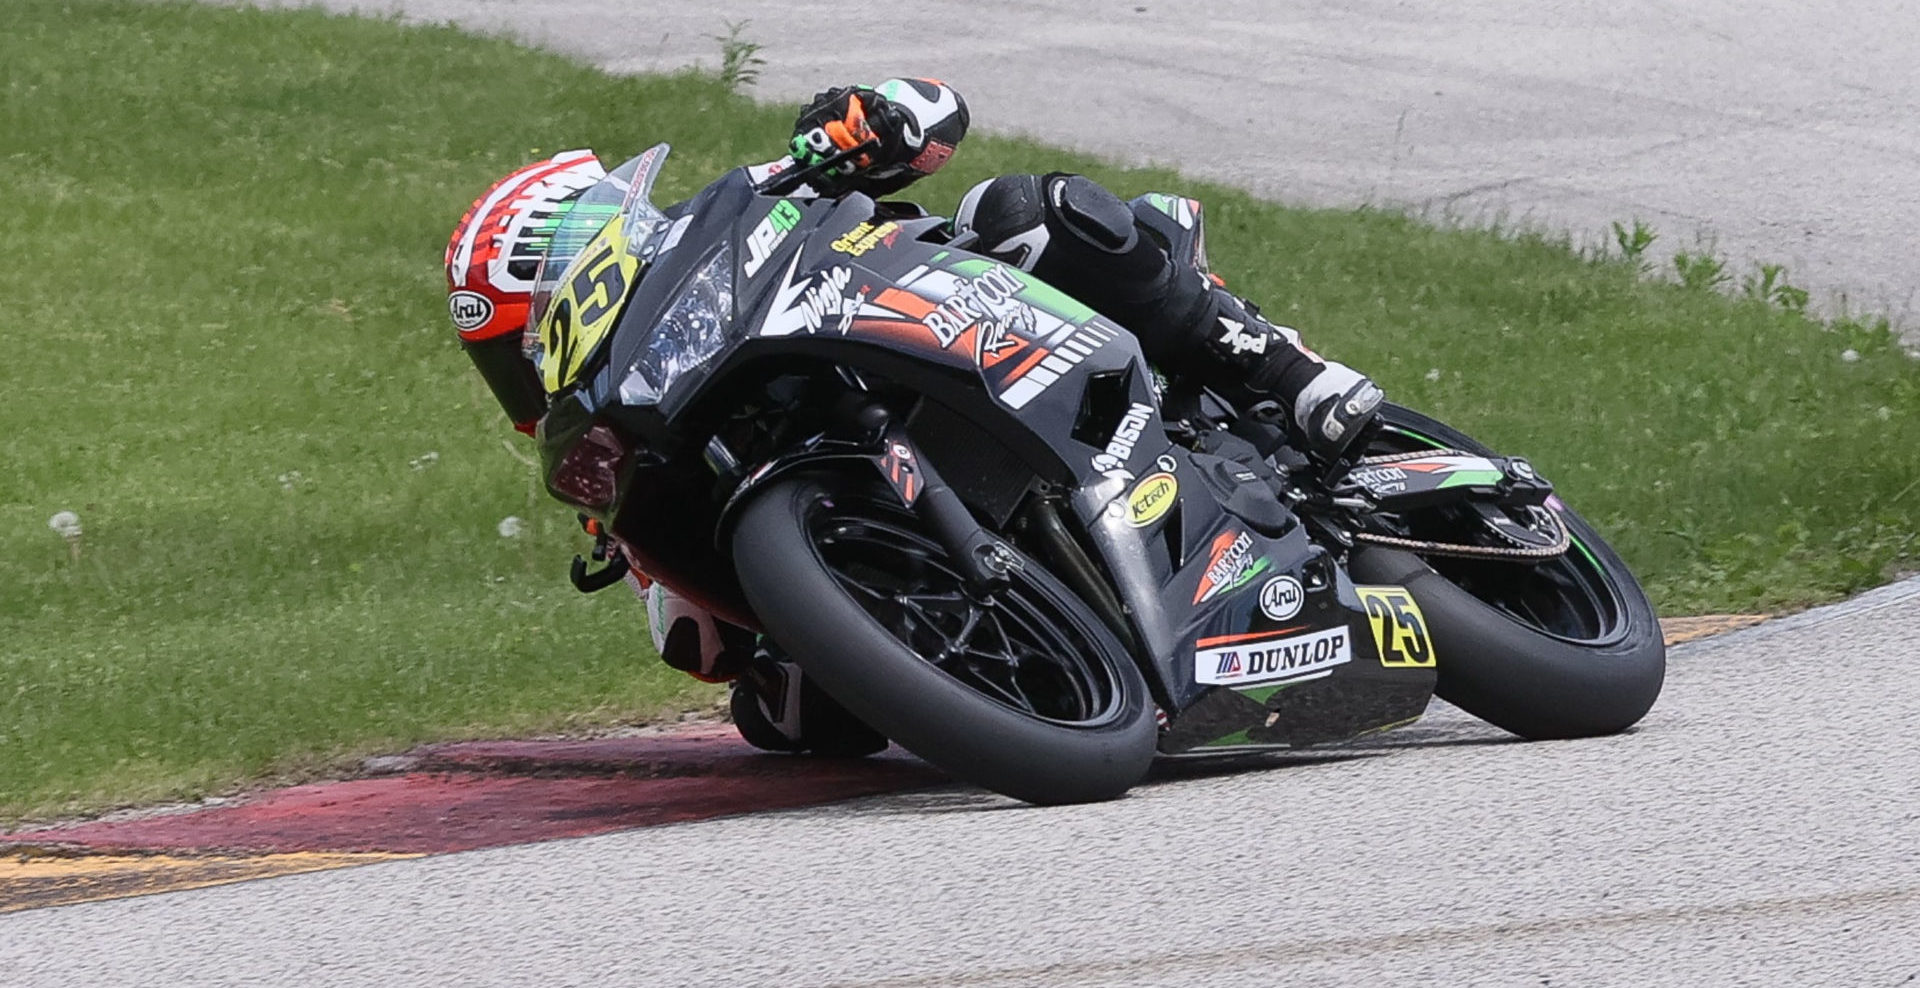 Dominic Doyle (25) at speed at Road America. Photo by Brian J. Nelson, courtesy MotoAmerica.